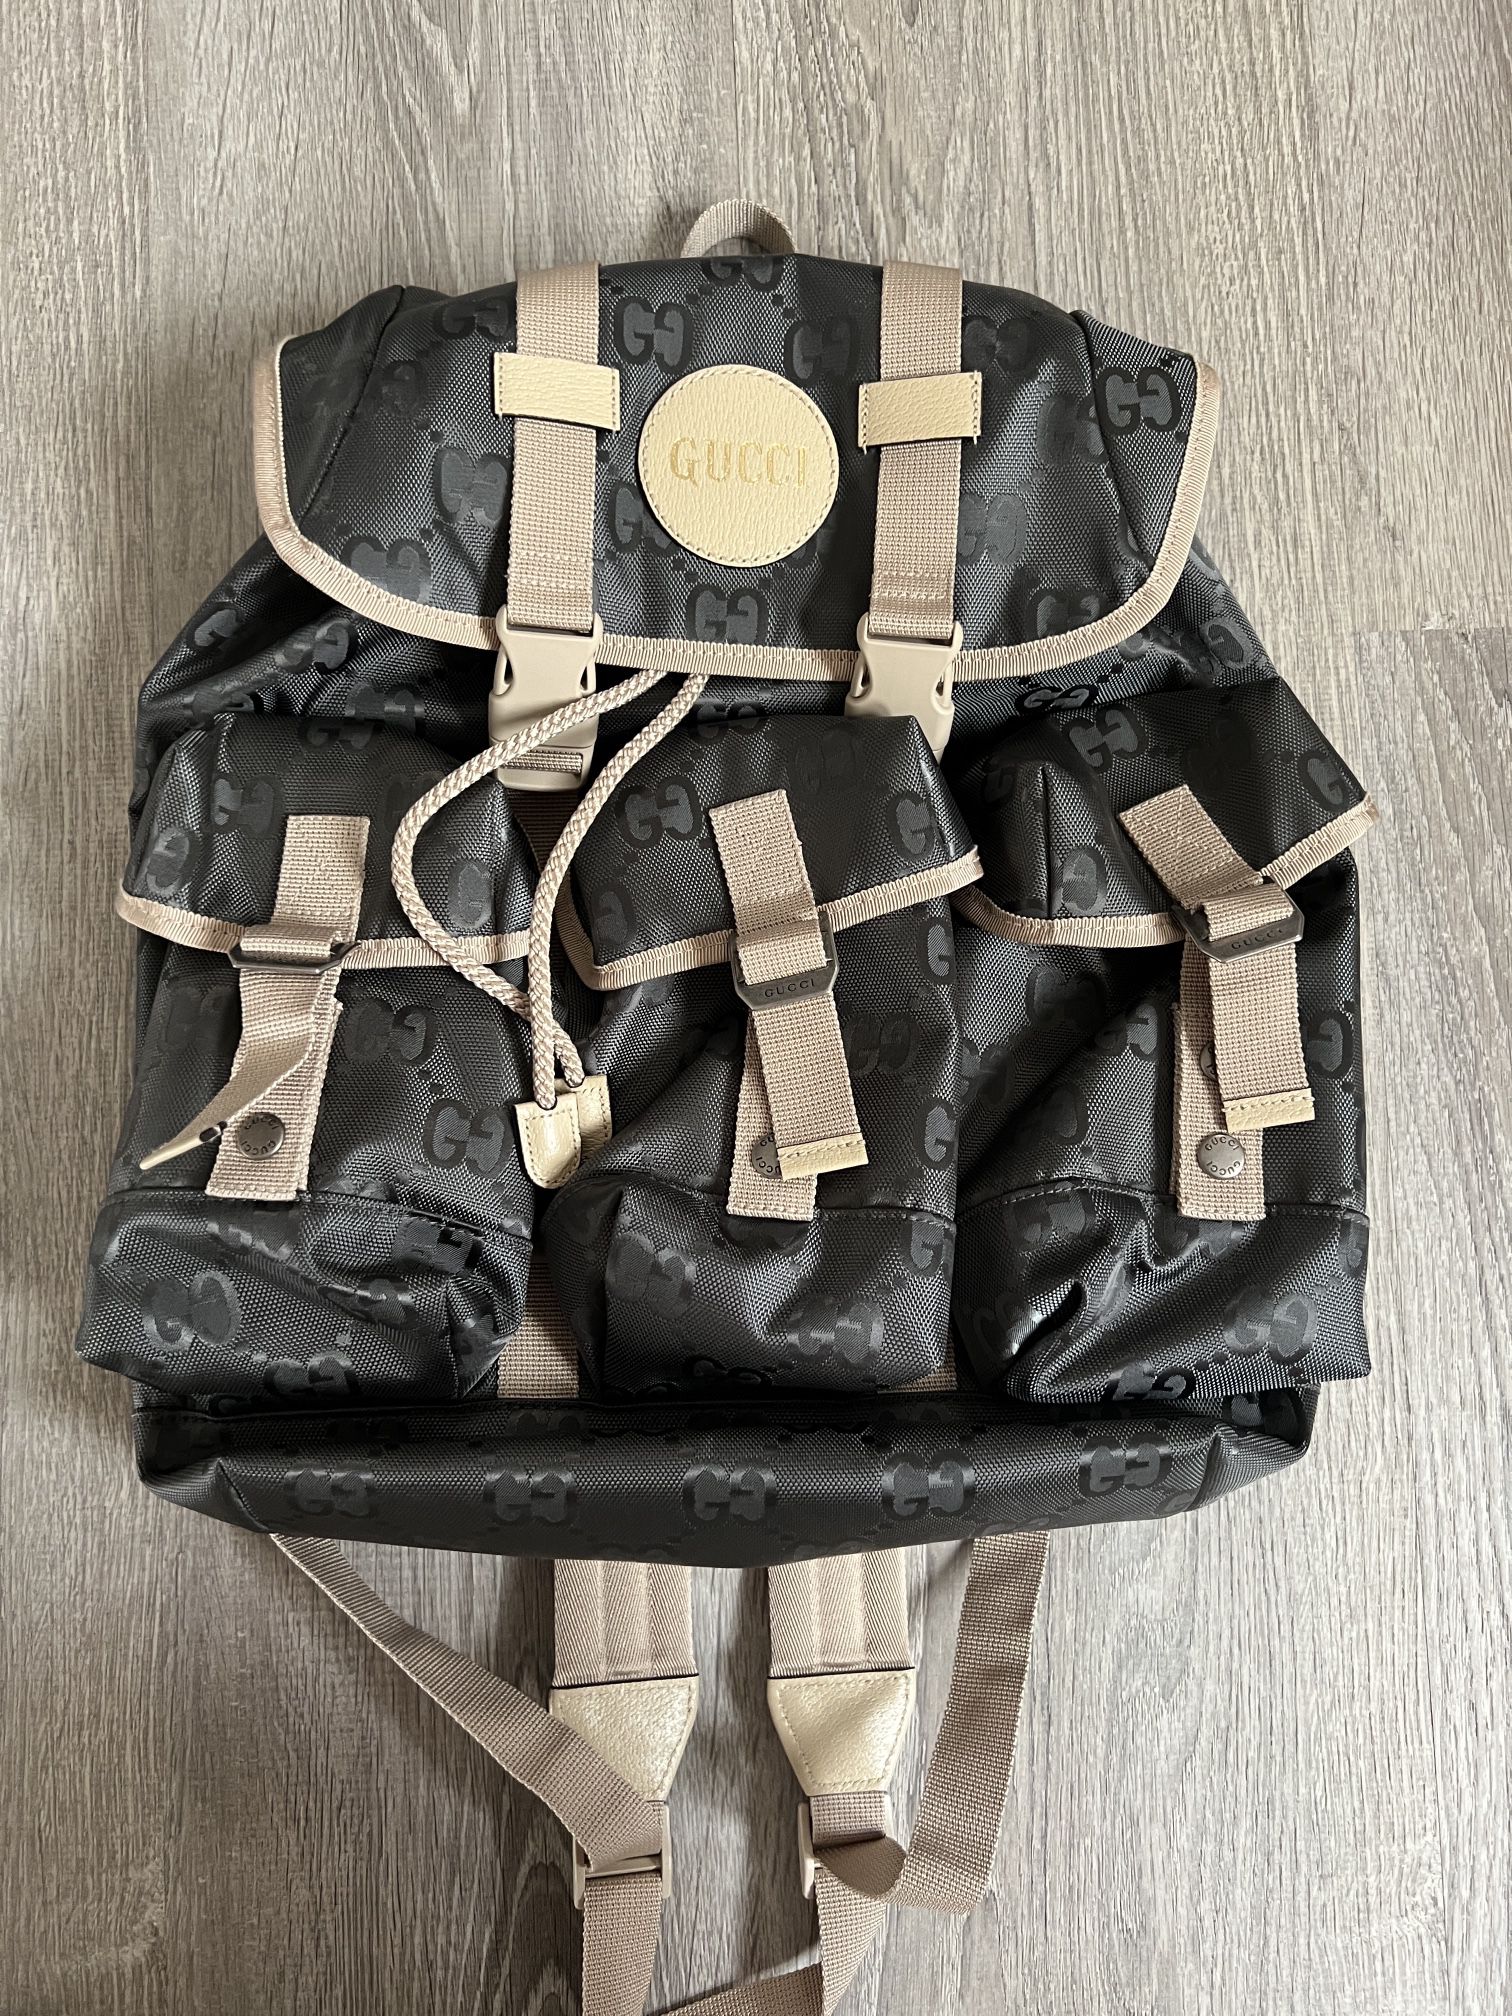 Gucci Backpack (large) for Sale in Mesa, AZ - OfferUp